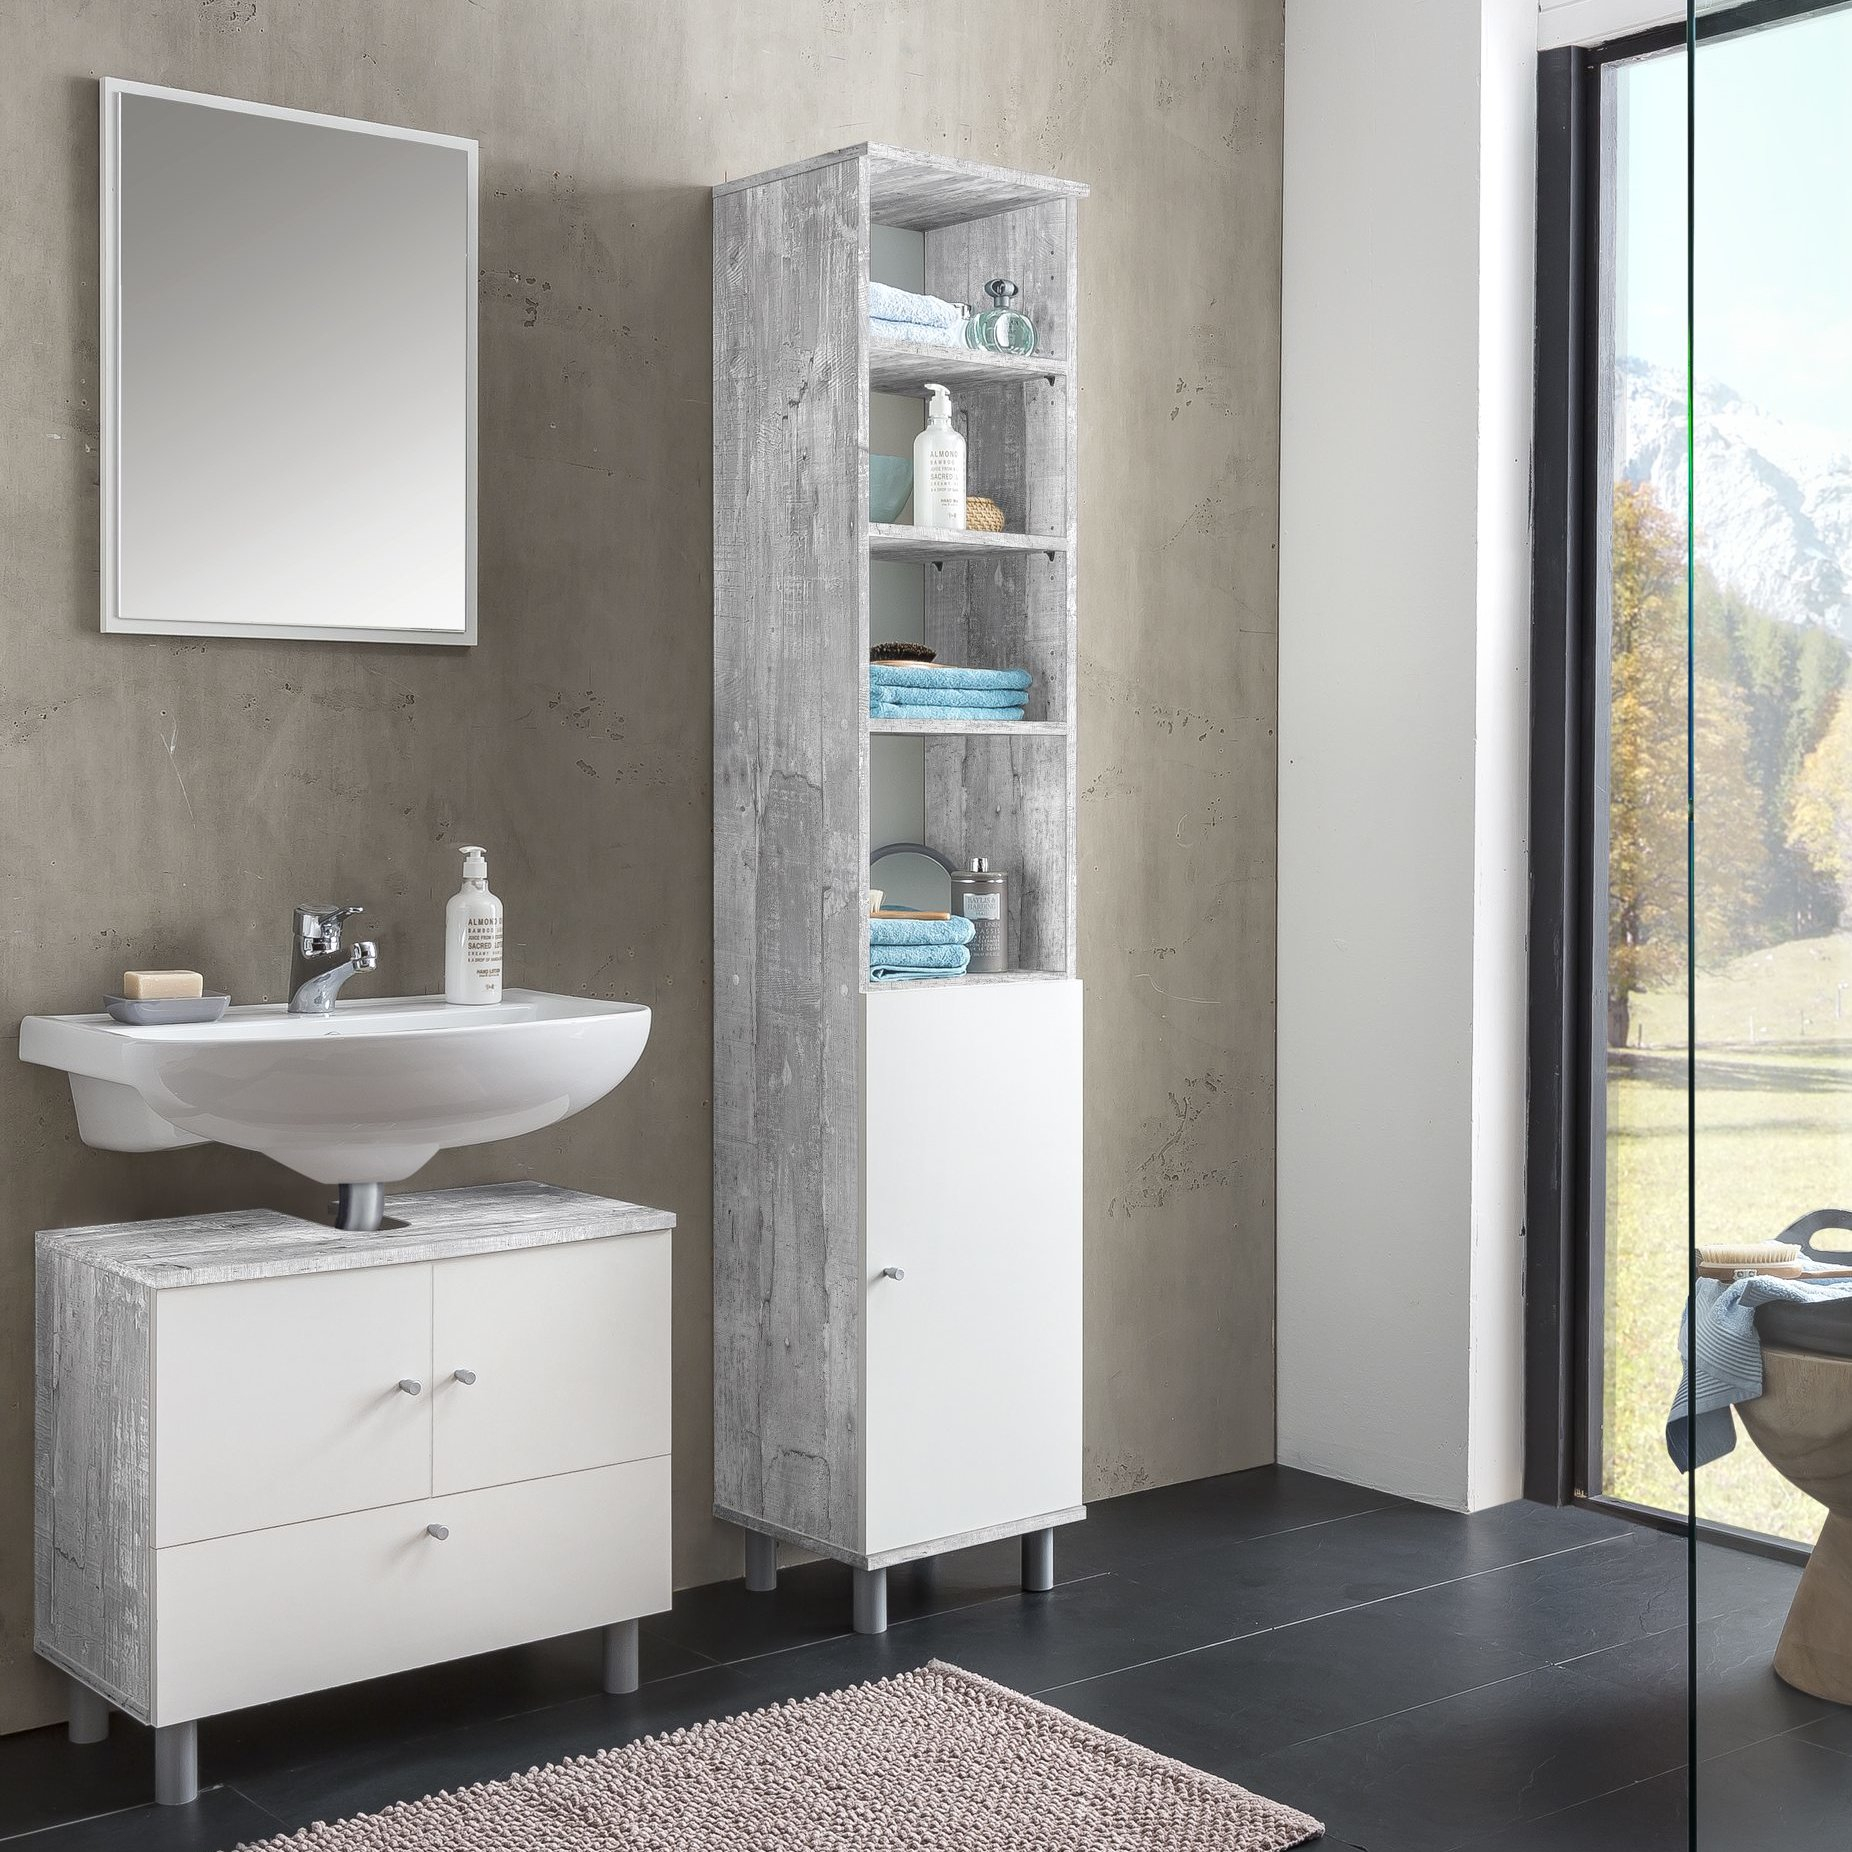 Belfry Bathroom Charnley 3 Piece Bathroom Furniture Set With Mirror throughout proportions 1852 X 1852